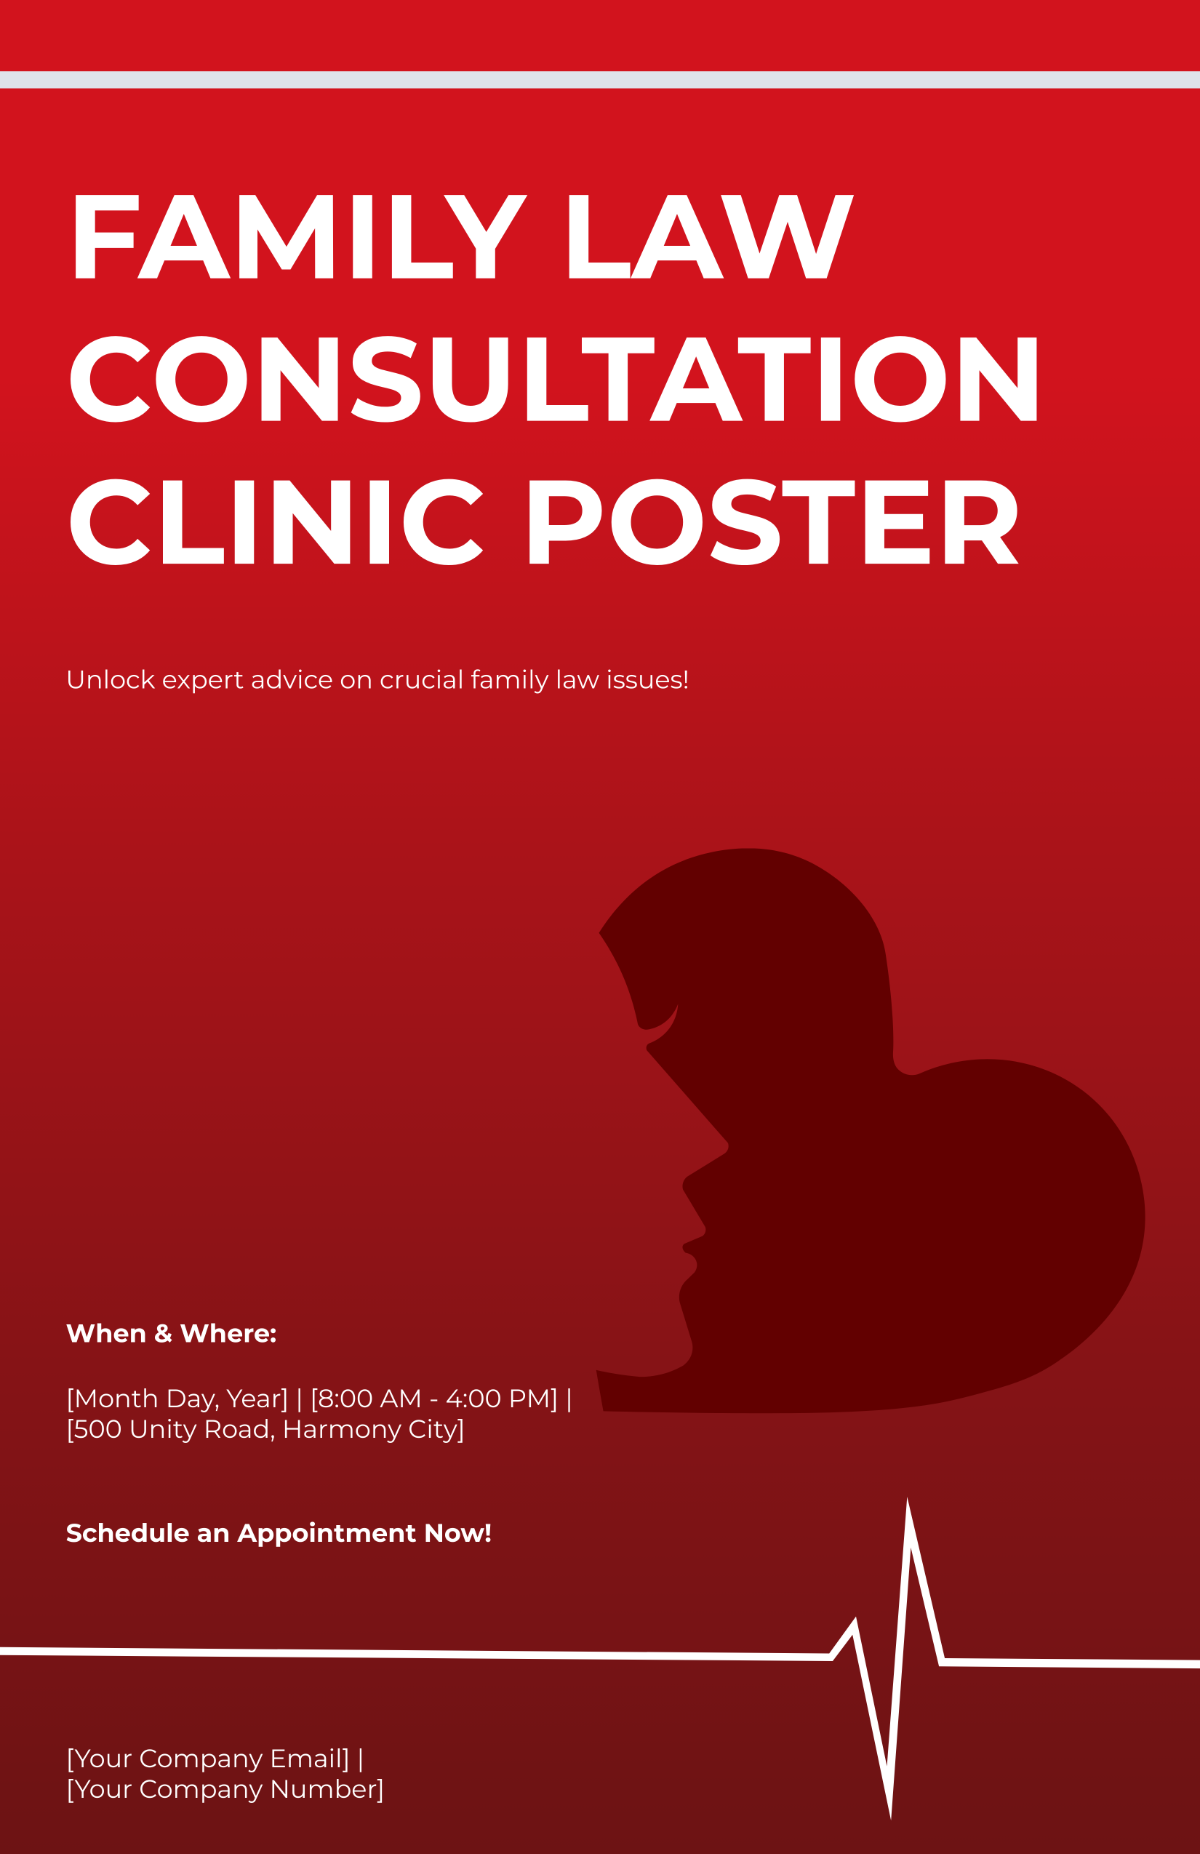 Family Law Consultation Clinic Poster